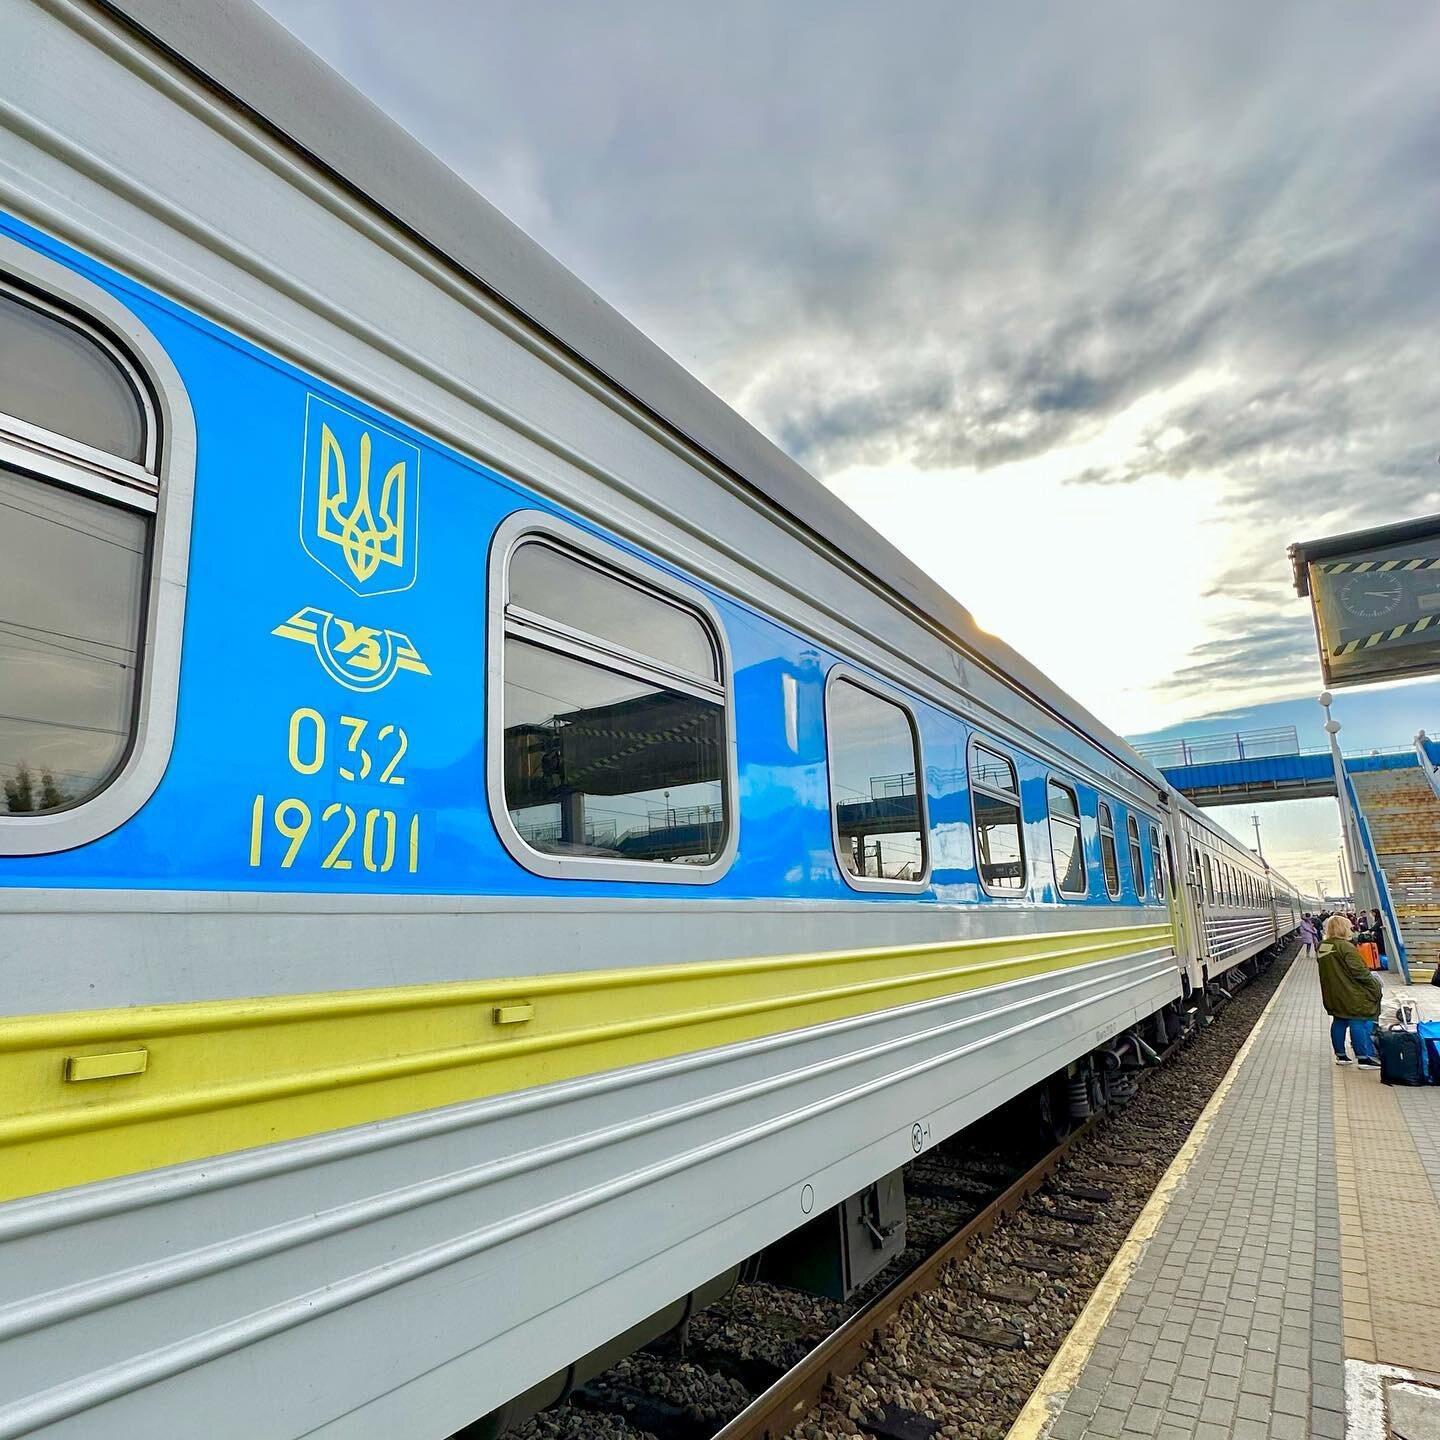 Last leg of an over 30-hour journey to reach Kyiv. Follow along as I embark on a solo trip around Ukraine to see and hear the impact of war over a year out from the Russian invasion